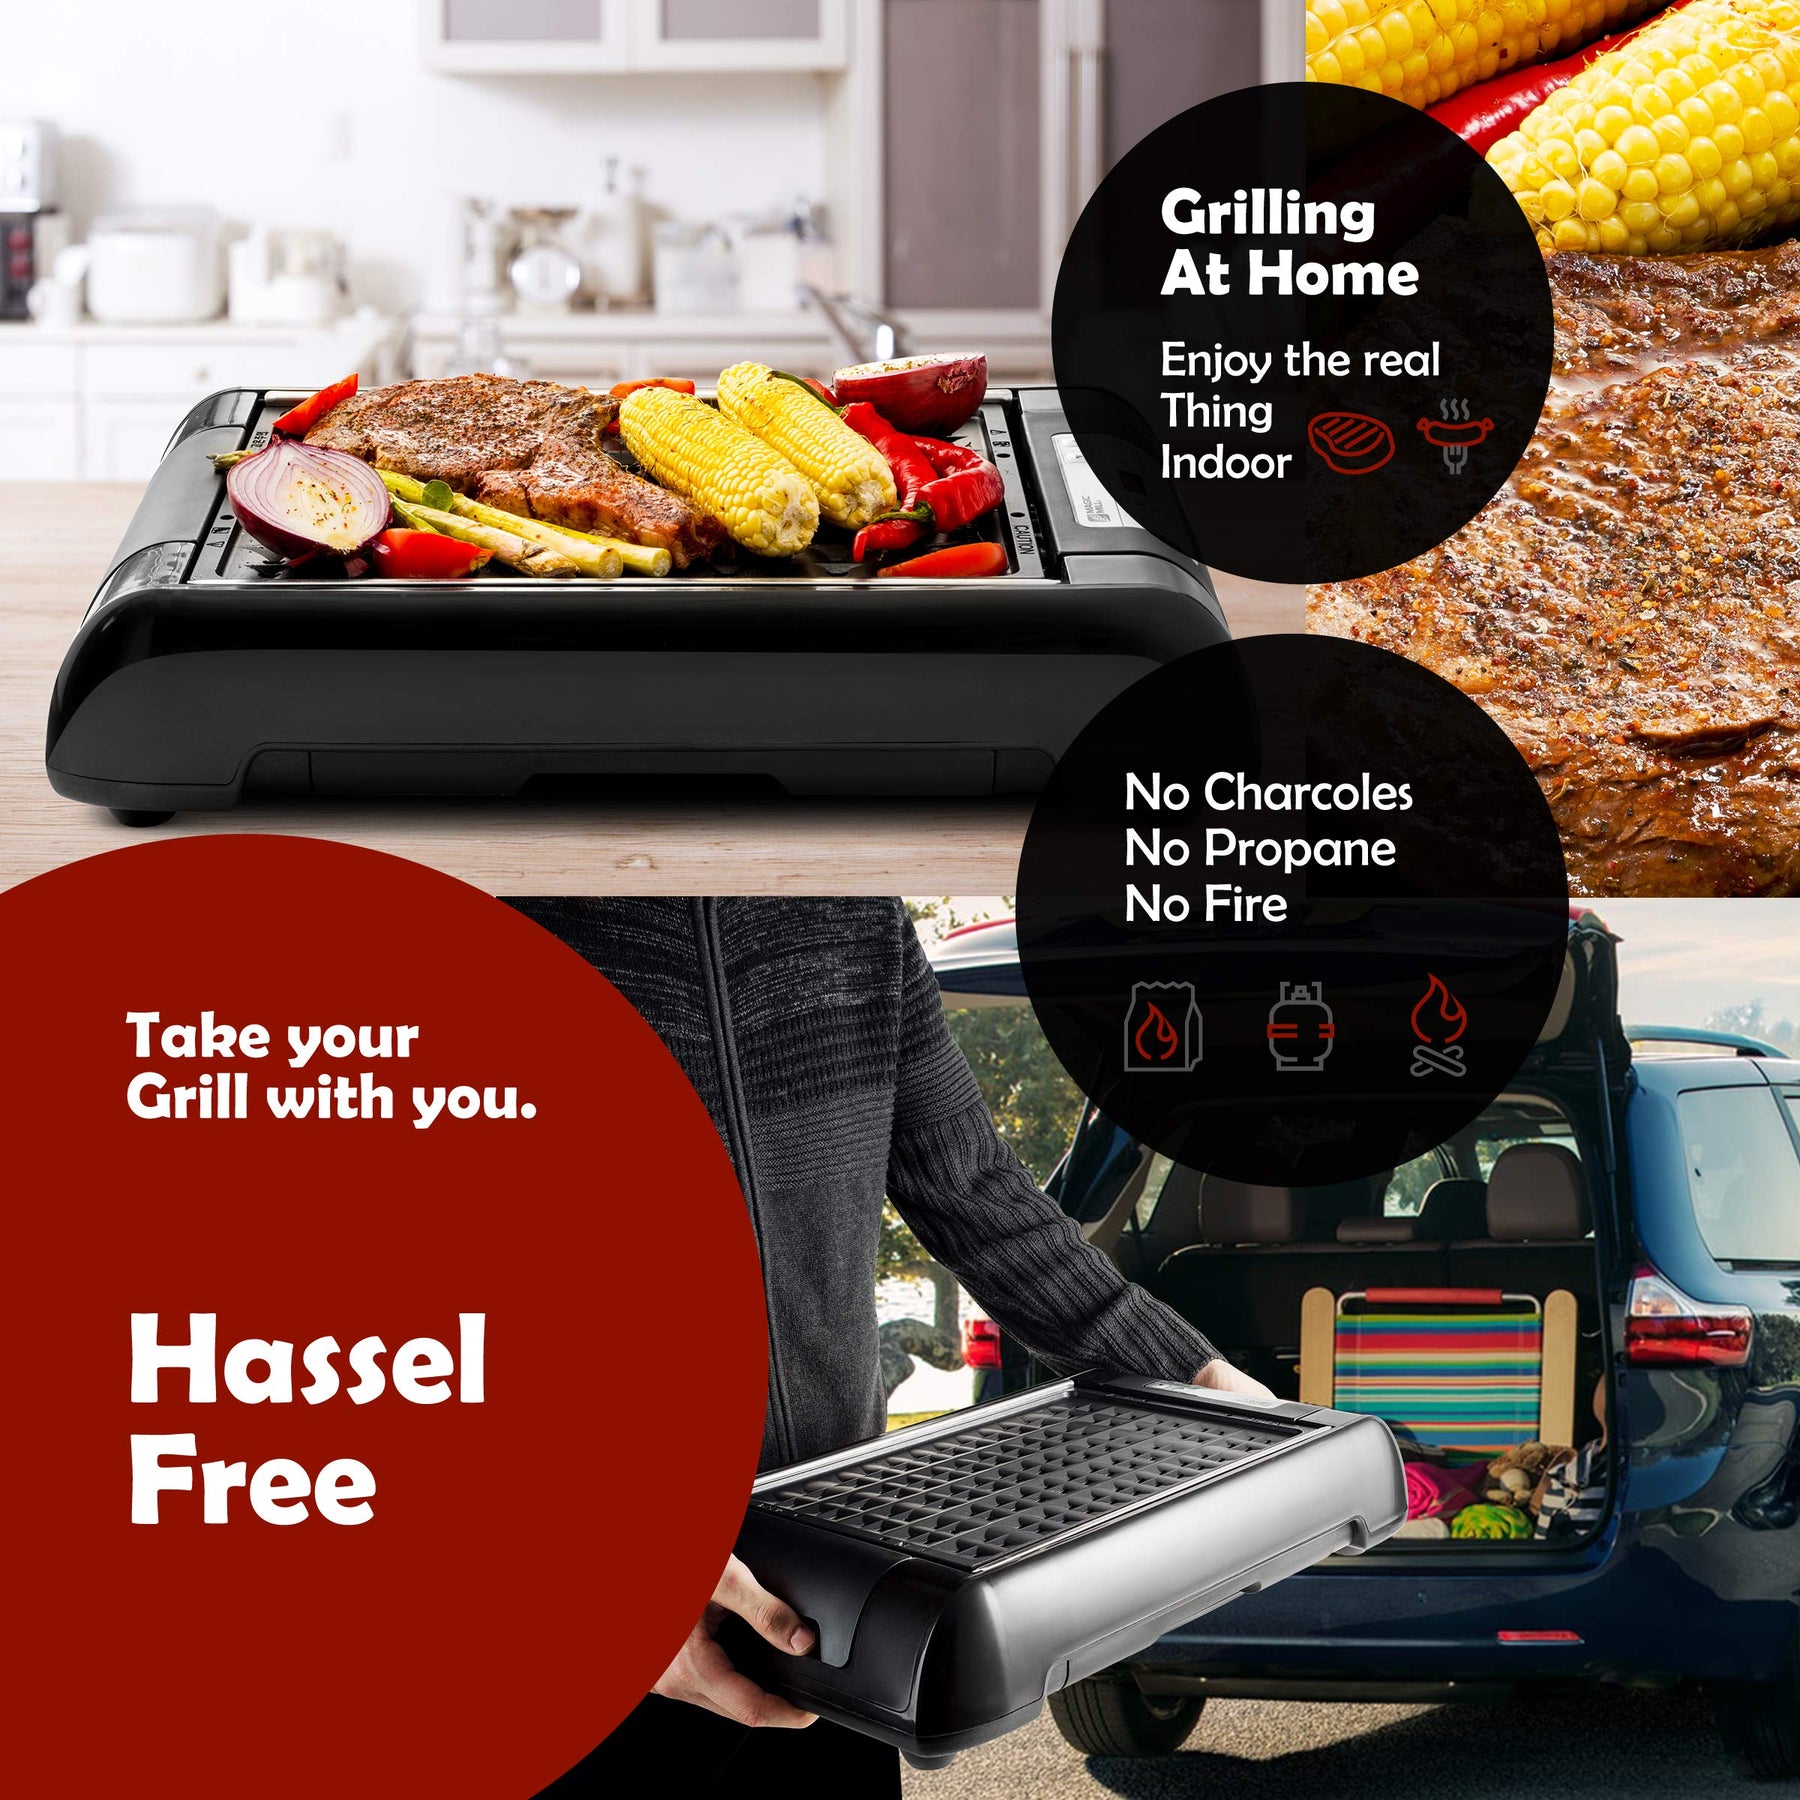 Magic-Mill Electric Smokeless Grill and Griddle Pan for Indoor BBQ